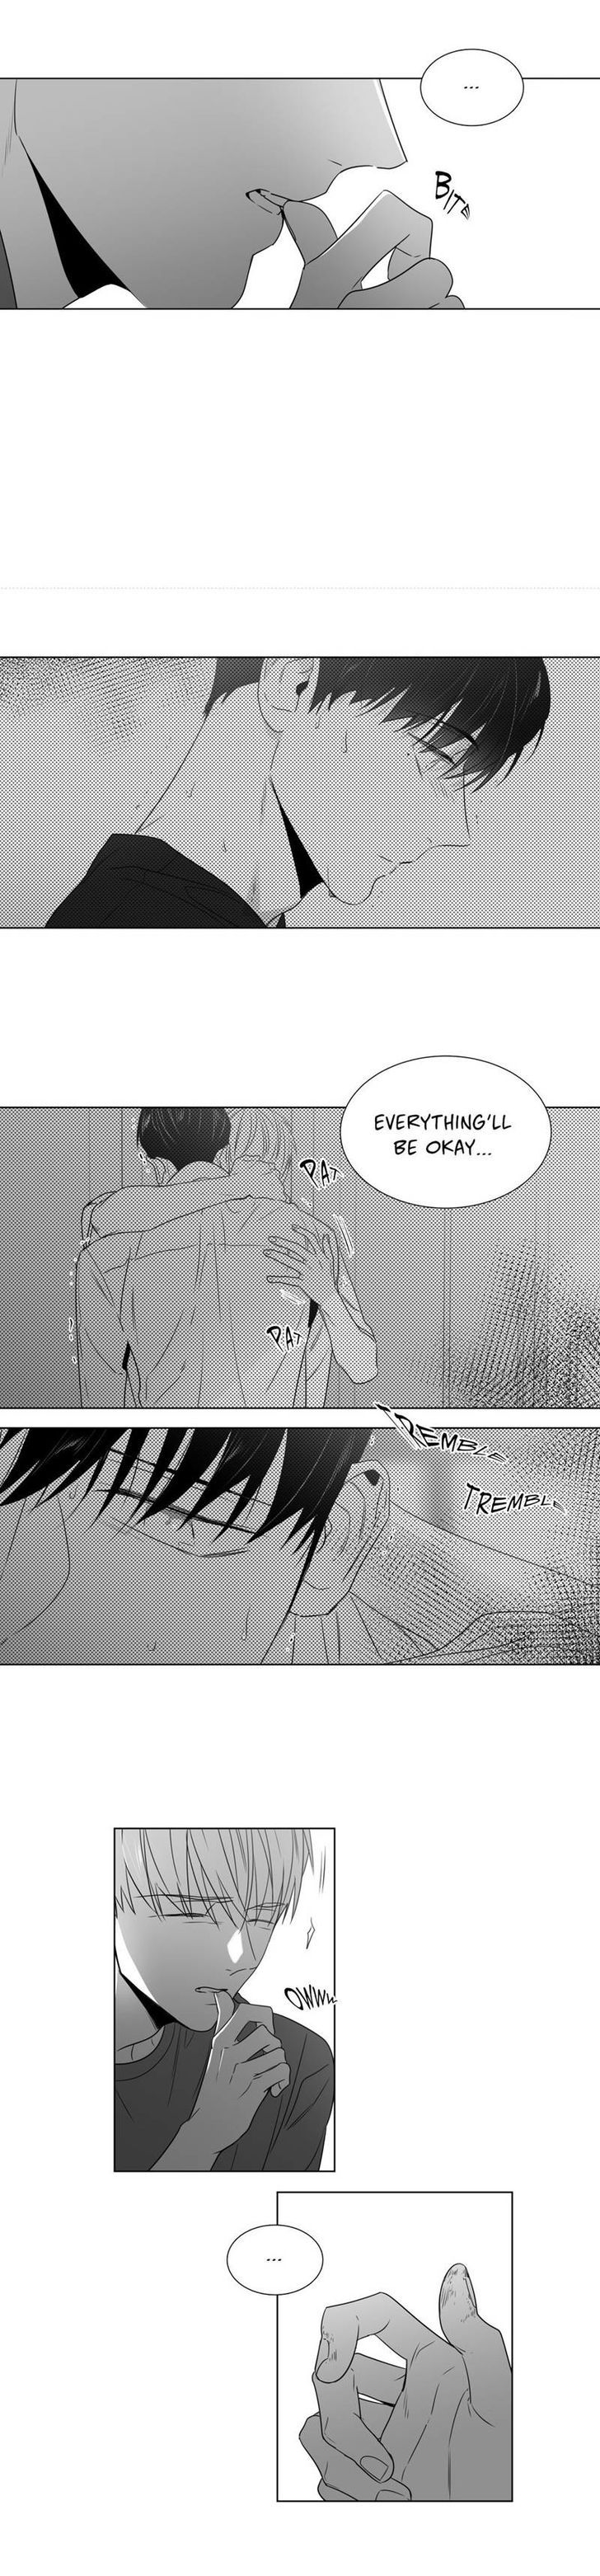 Lover Boy (Lezhin) Chapter 045 page 9